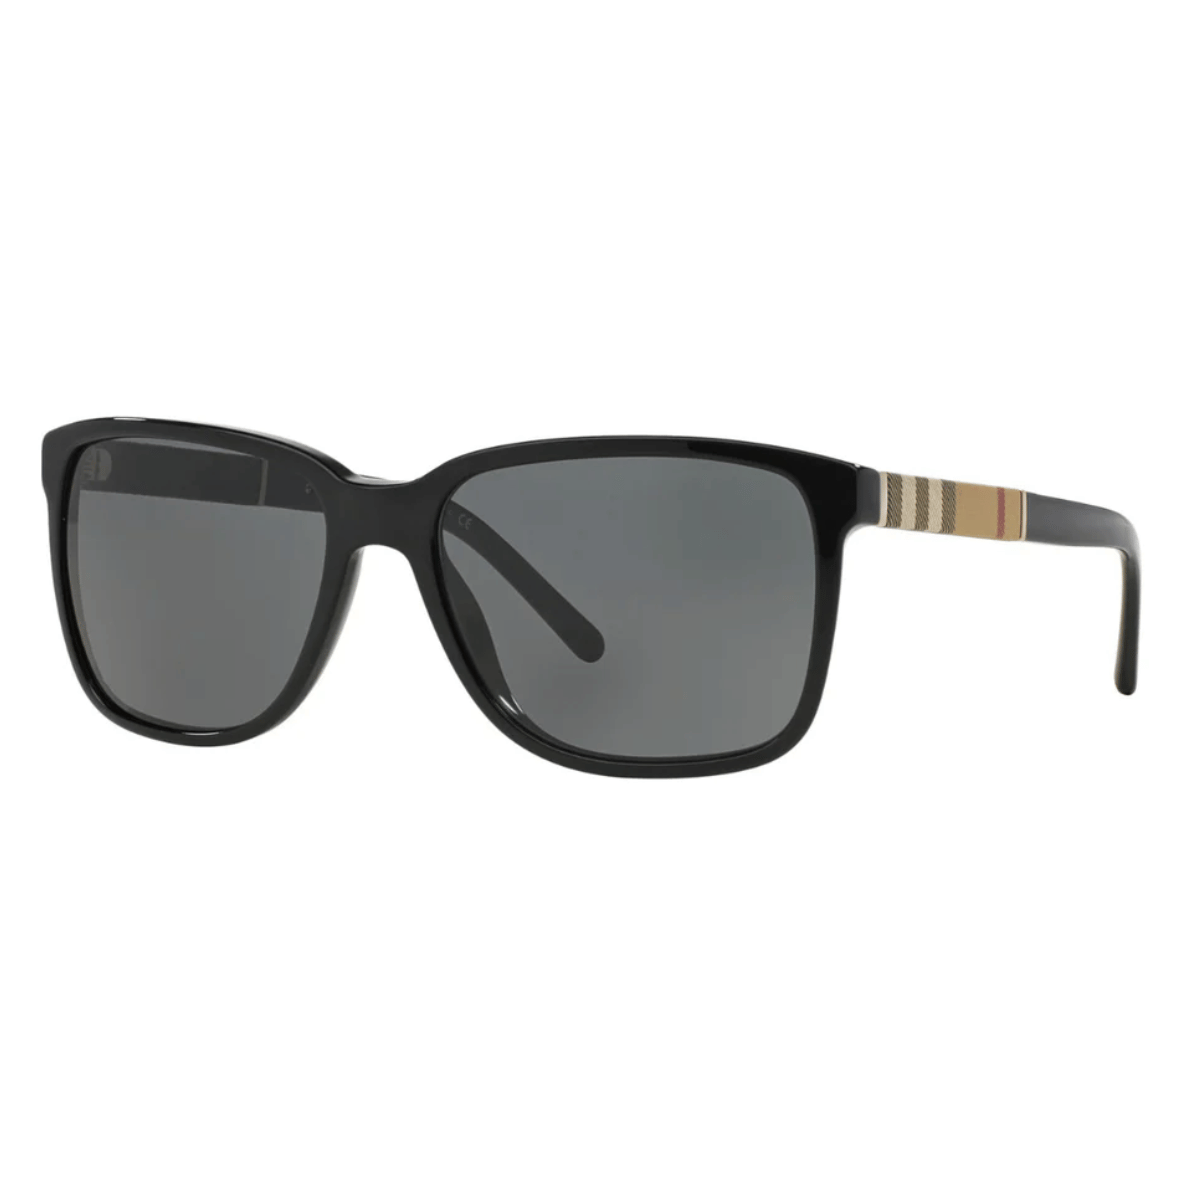 "Shop Burberry 4181 sunglasses online at Optorium, where fashion meets affordability."